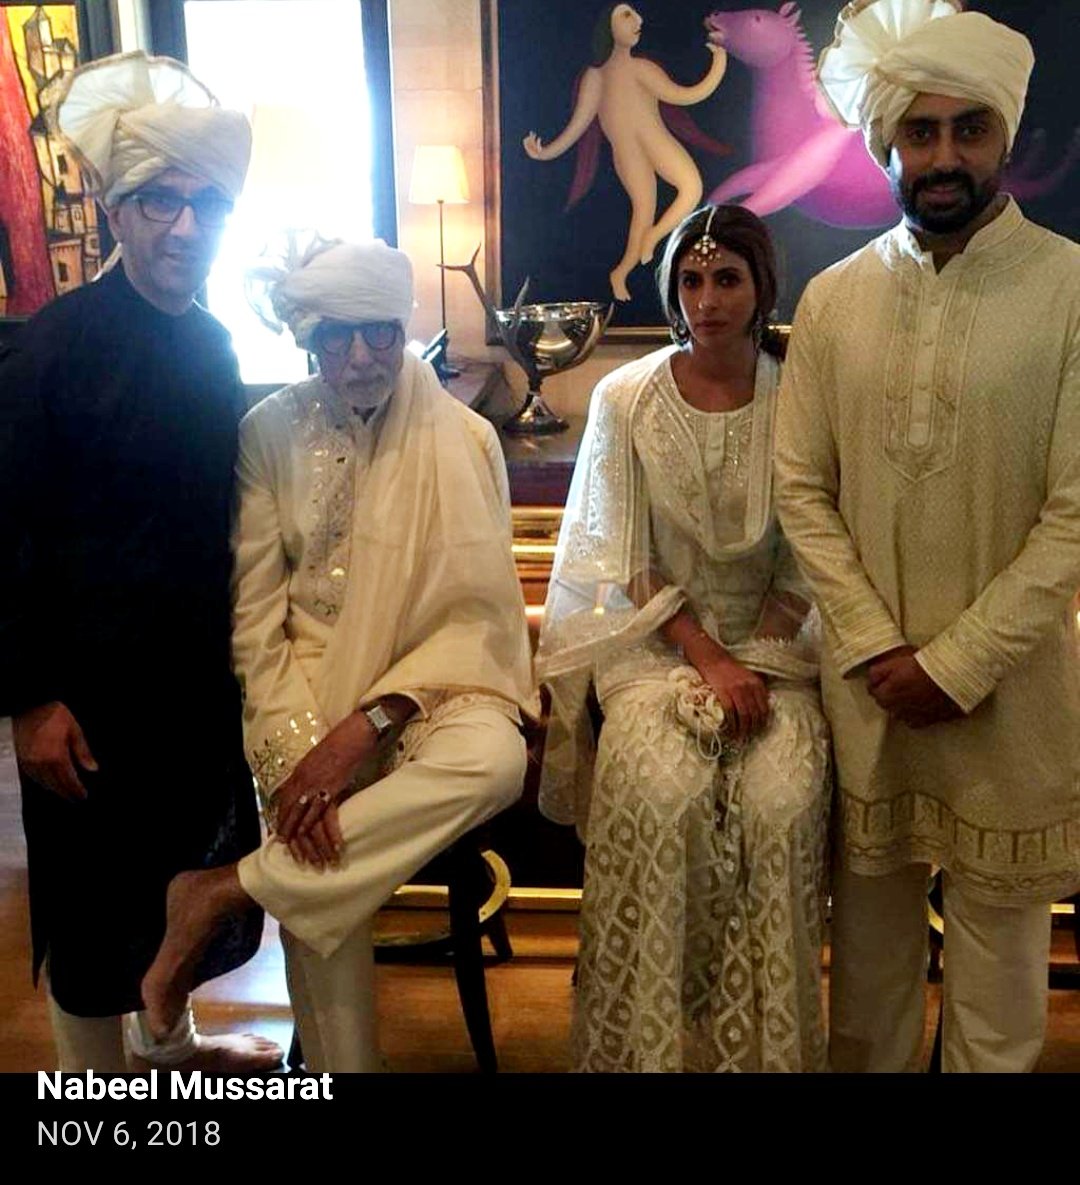 Shri Amitabh Bachchan and family with British based Pakistani business brothers Aneel Mussarat & Nabeel Mussarat.Mussarat brothers have close connection with Pak Army, ISI & Imran Khan.  @SrBachchan Sir you really disappointed Indians. How can you enjoy with our enemies?